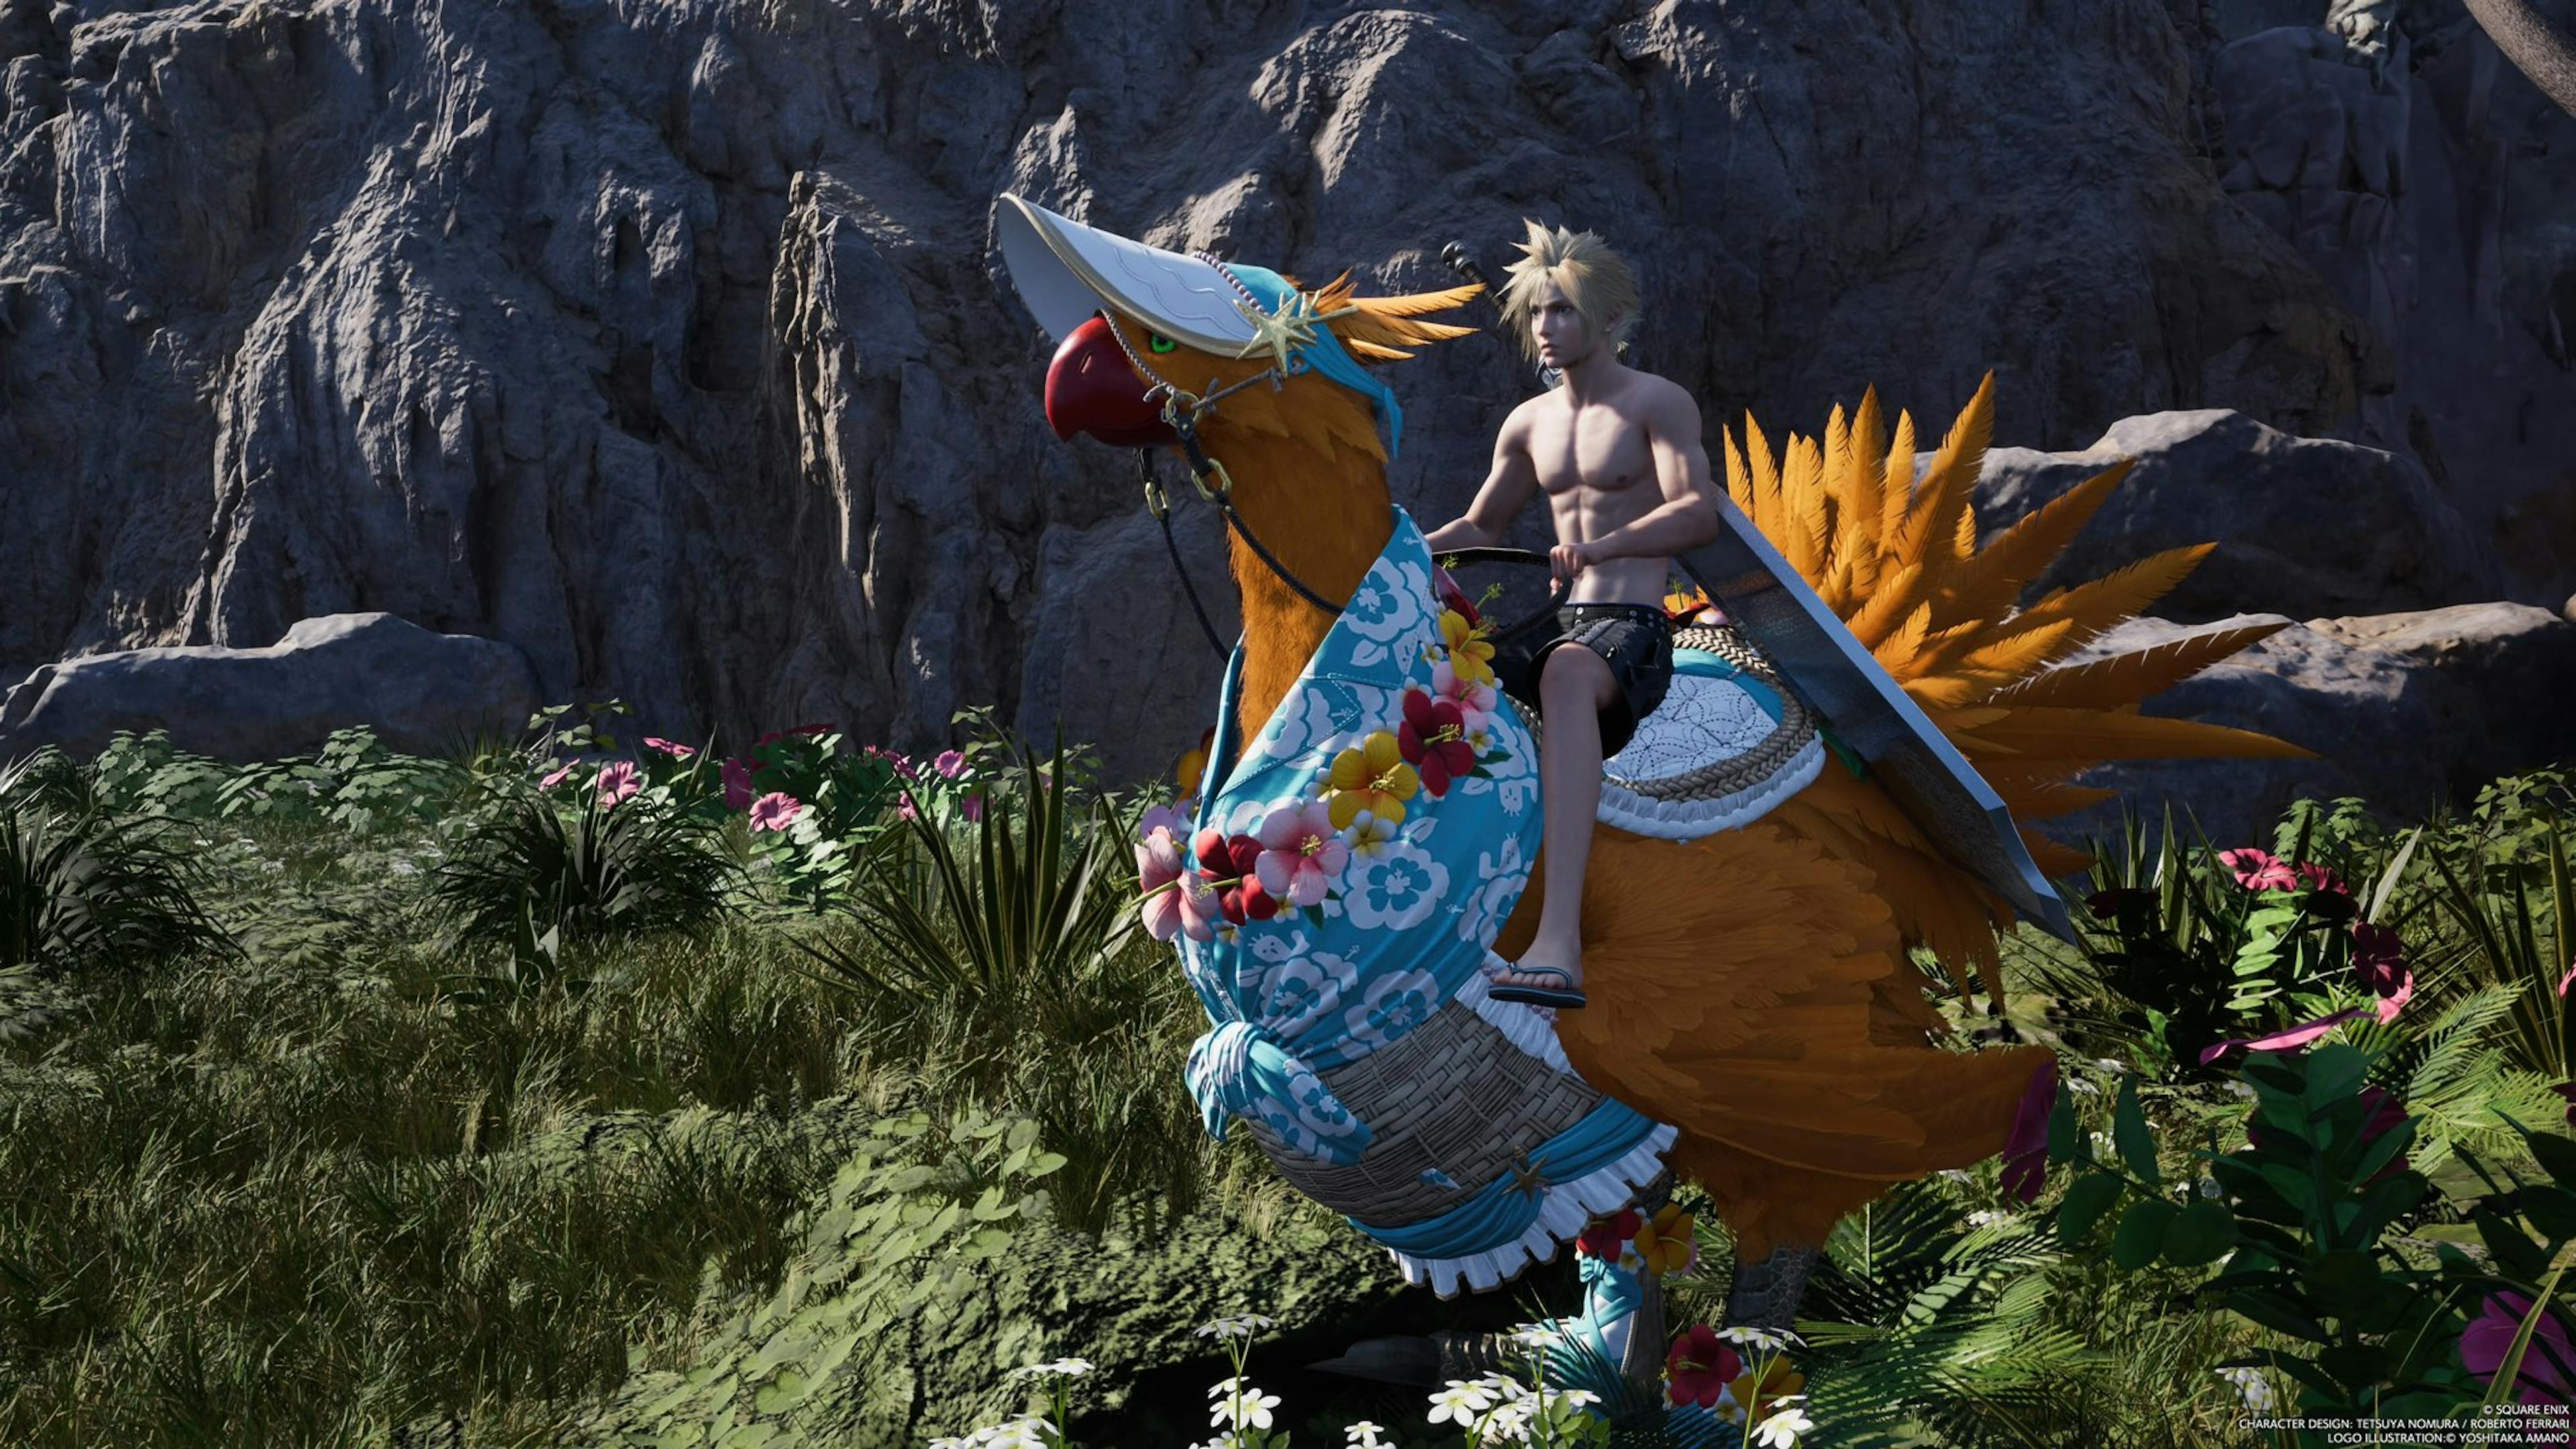 Cloud shirtless on a Chocobo that's wearing a cute beachy hat and scarf.